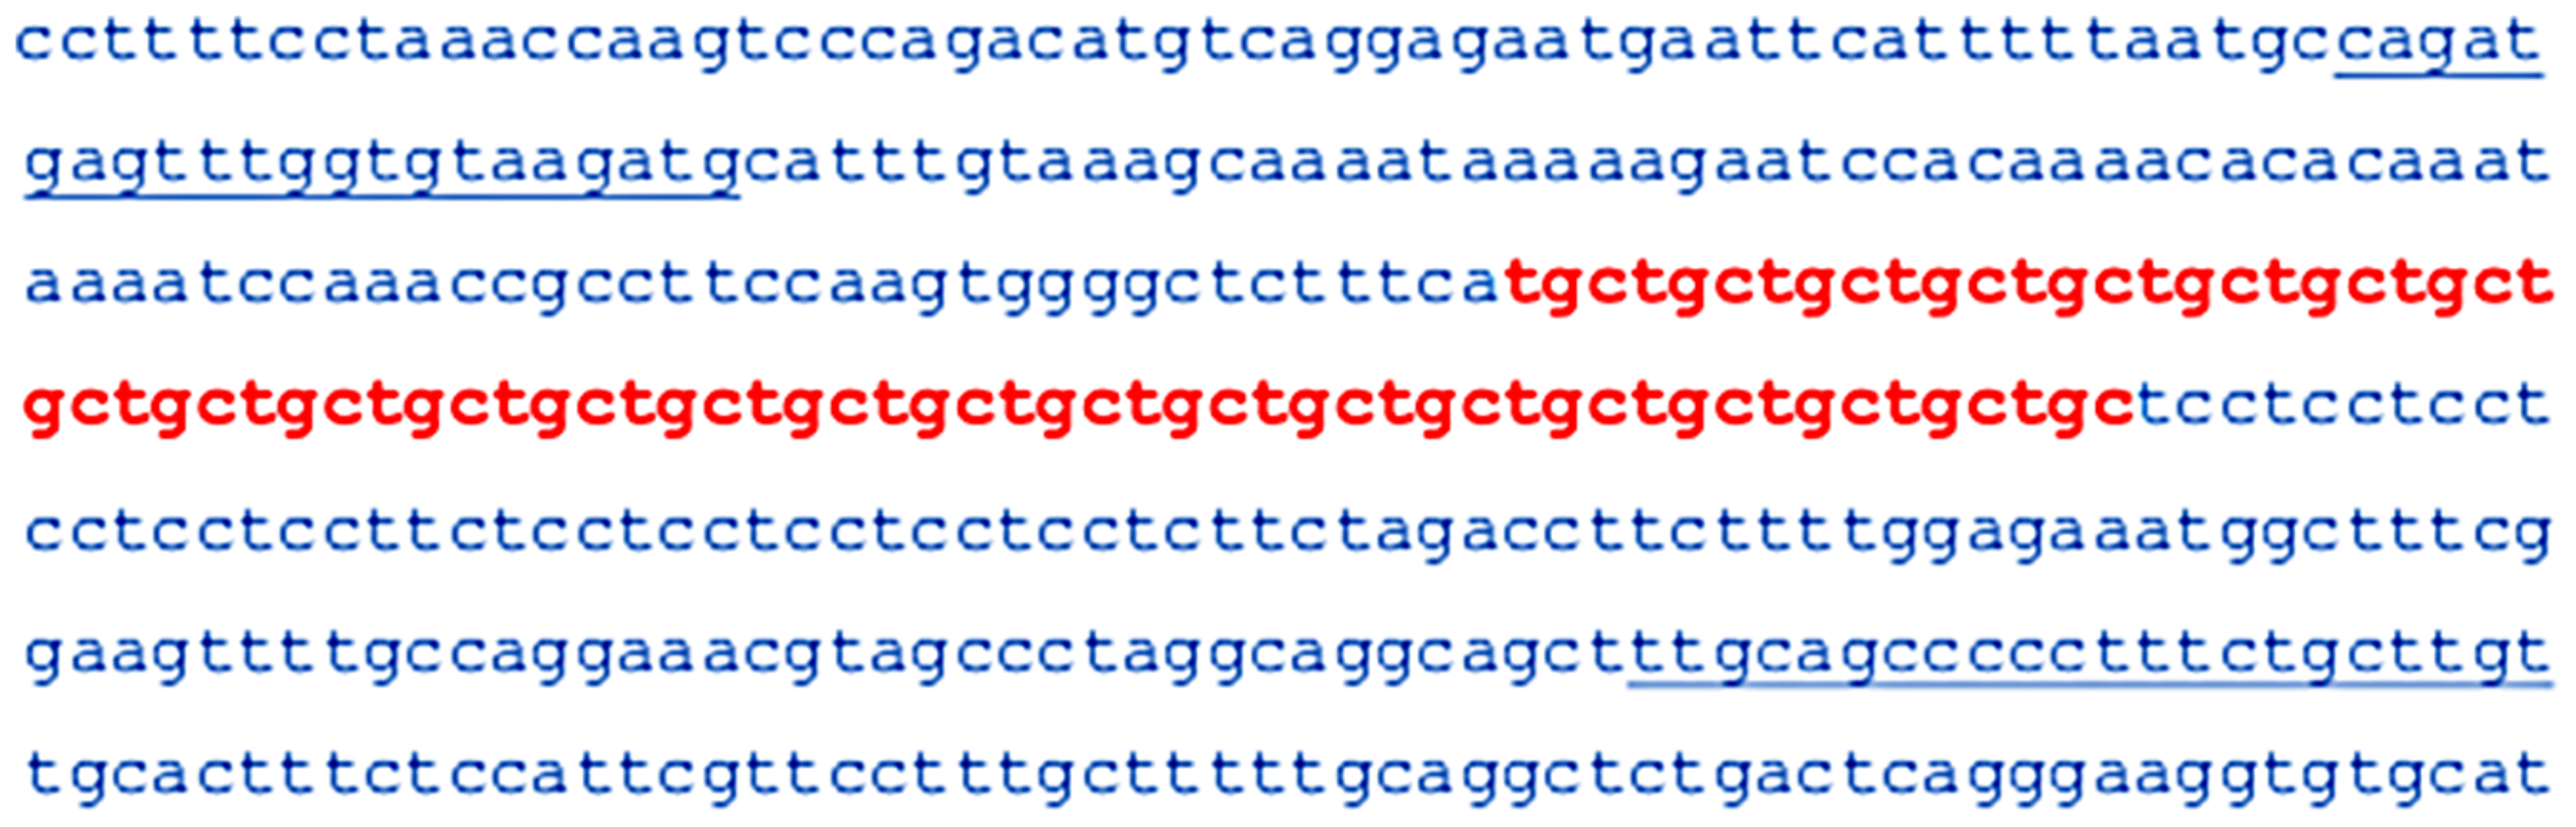 NBNB: CAPTION 1:   It is now recognized that three-letter repeats of DNA, like the one shown here, are involved in more than 50 hereditary diseases, including fragile X syndrome, spinocerebellar ataxia 1, and Huntington’s disease. As the number of repeats increases from generation to generation, disease symptoms develop earlier and are more severe. The TGC repeat shown here in red is associated with a disease of the cornea and blurred vision. Mandel showed that a string of triple-letter repeats — CGG, CGG, CGG, and so on — disrupted the FMR1 gene. People with fragile X have at least 200 repeats in the gene and cannot make the FMRP protein, which is vital for brain function.Credit: Wieben, E.D. et al. (2012) 